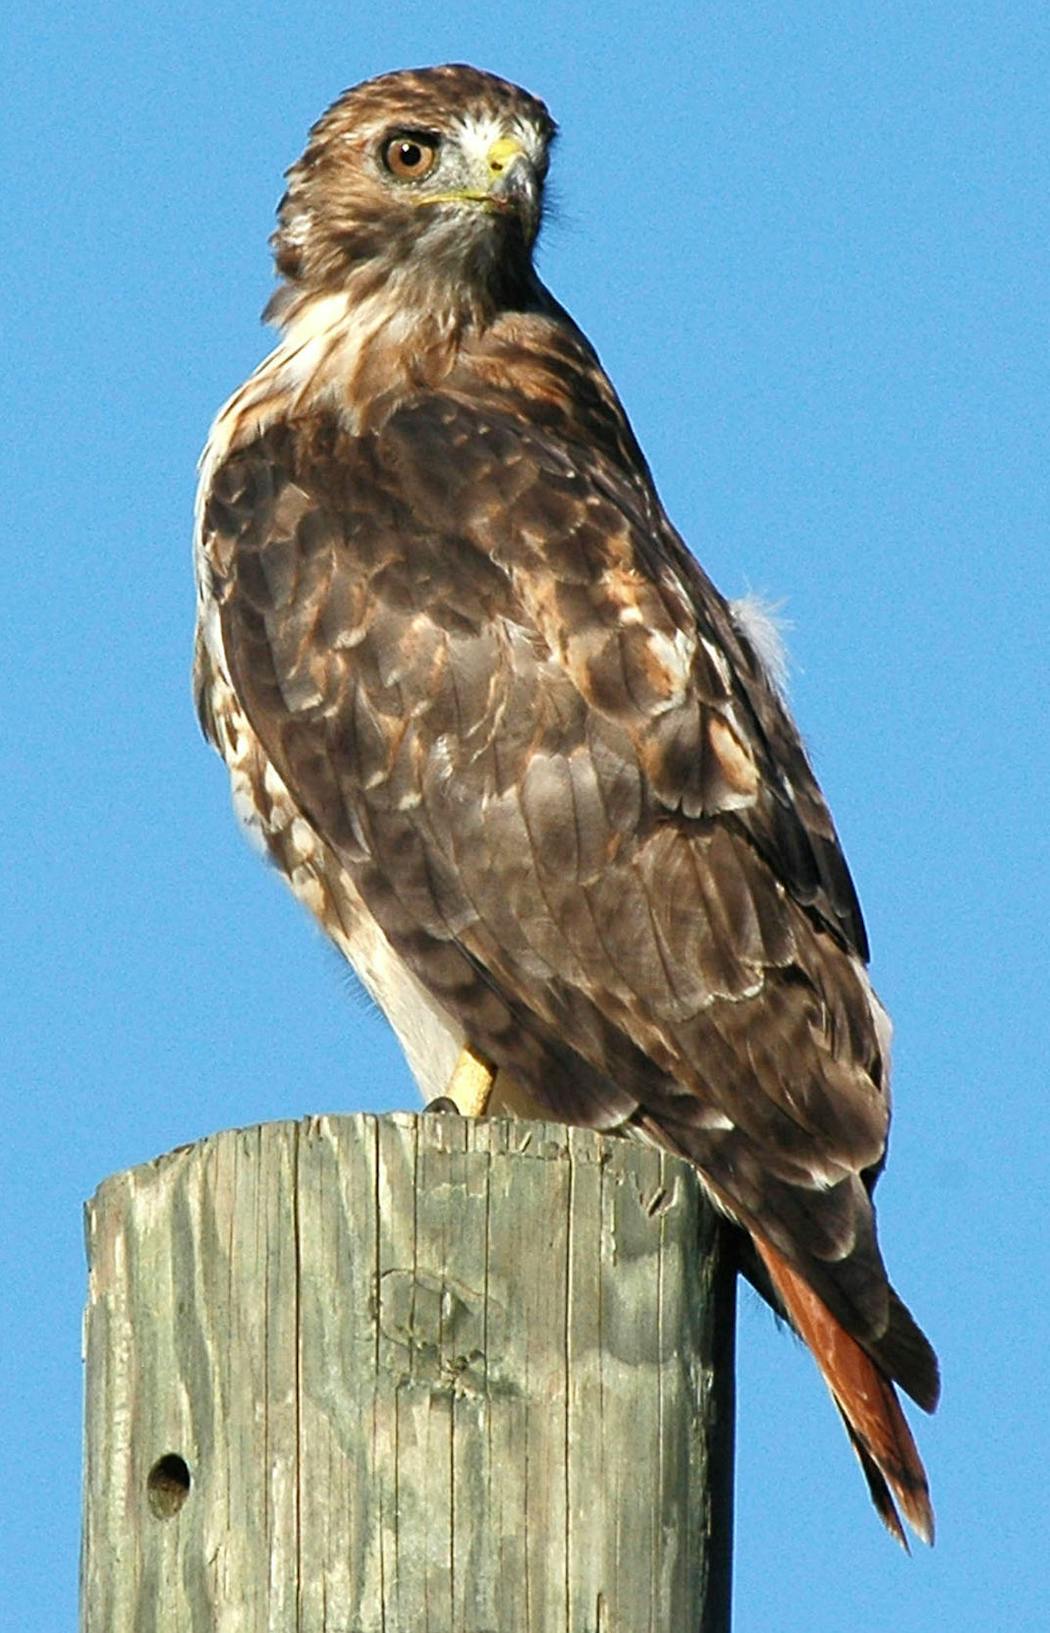 Adult red-tailed hawks have a rusty tail and are larger than broad-winged hawks. You’ll frequently spot them on the tops of utility poles.